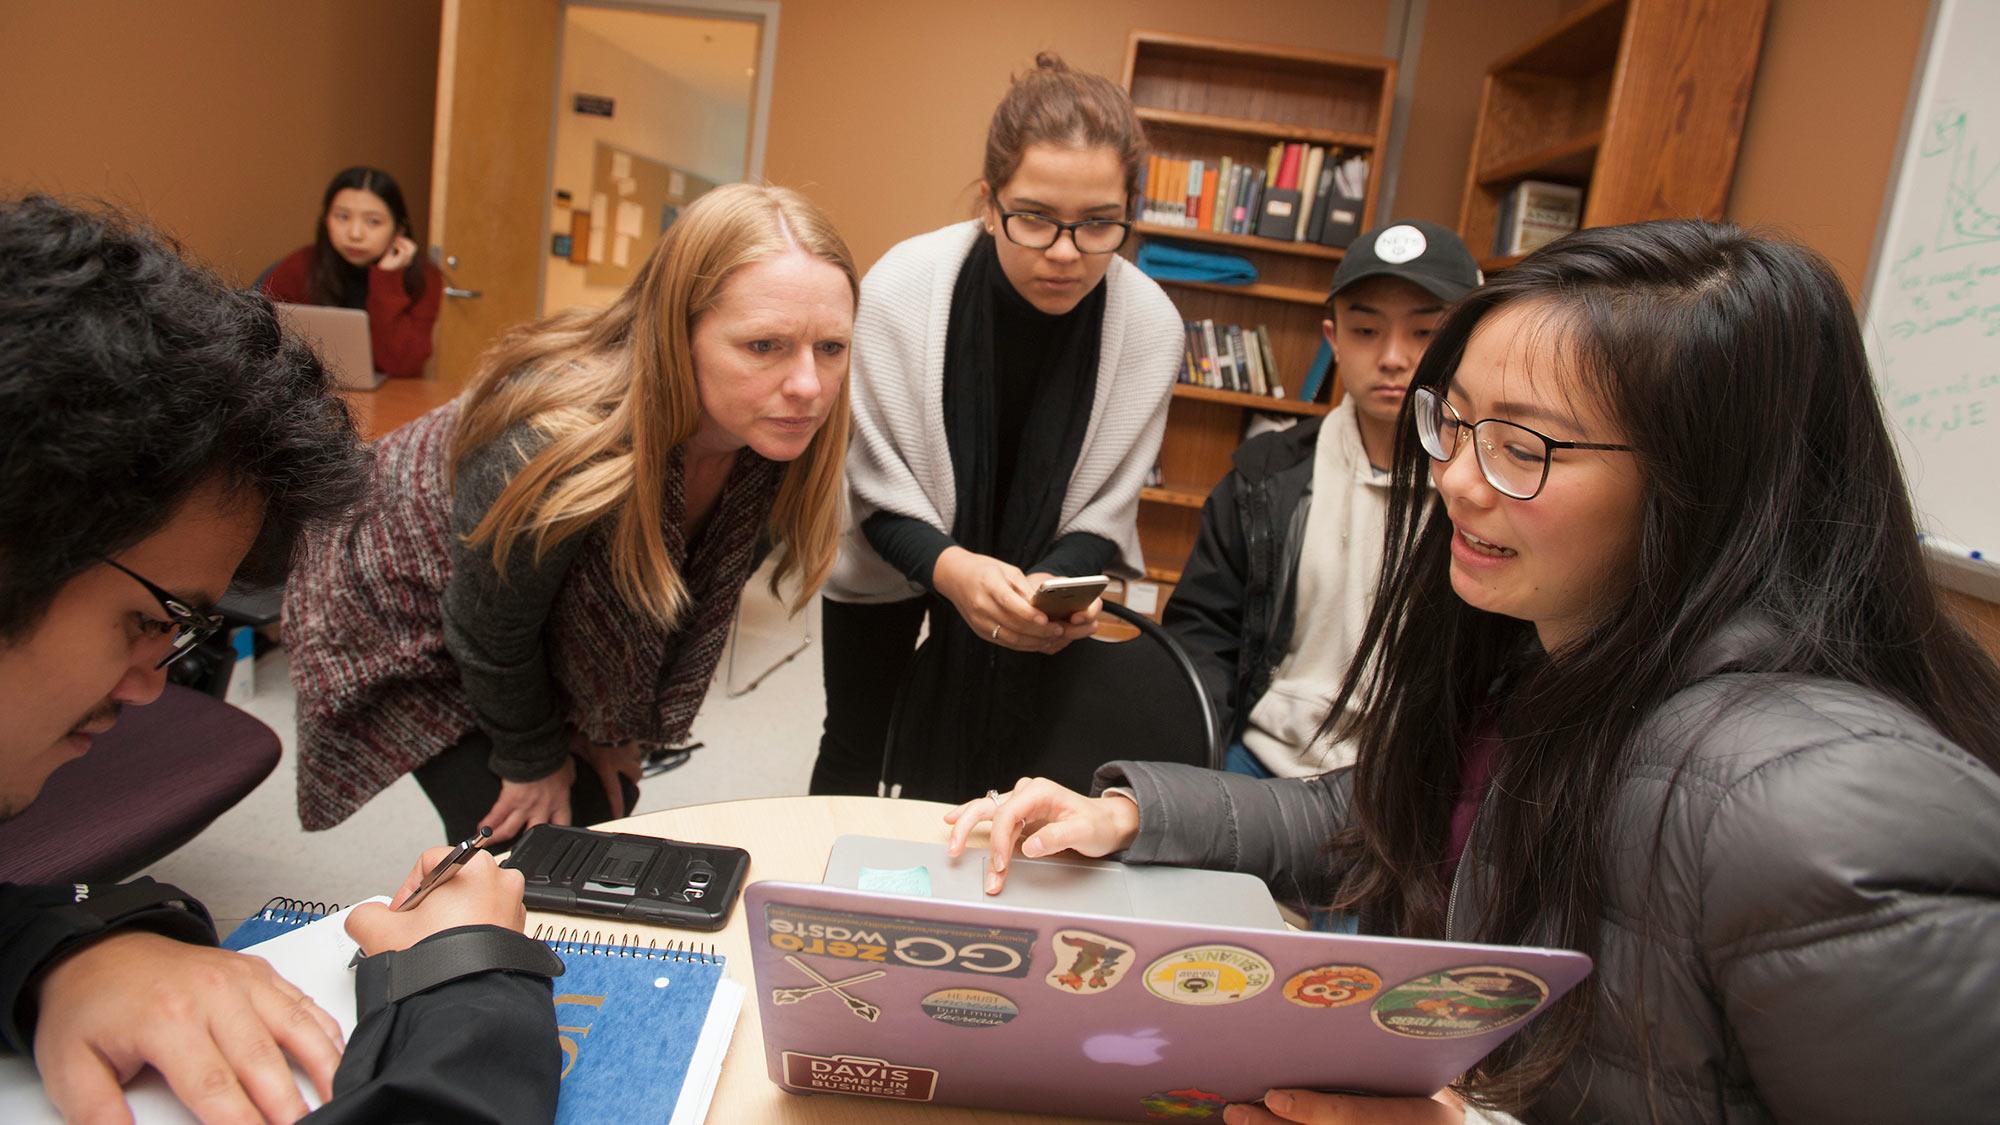 A group of students and their professor gather around a laptop 